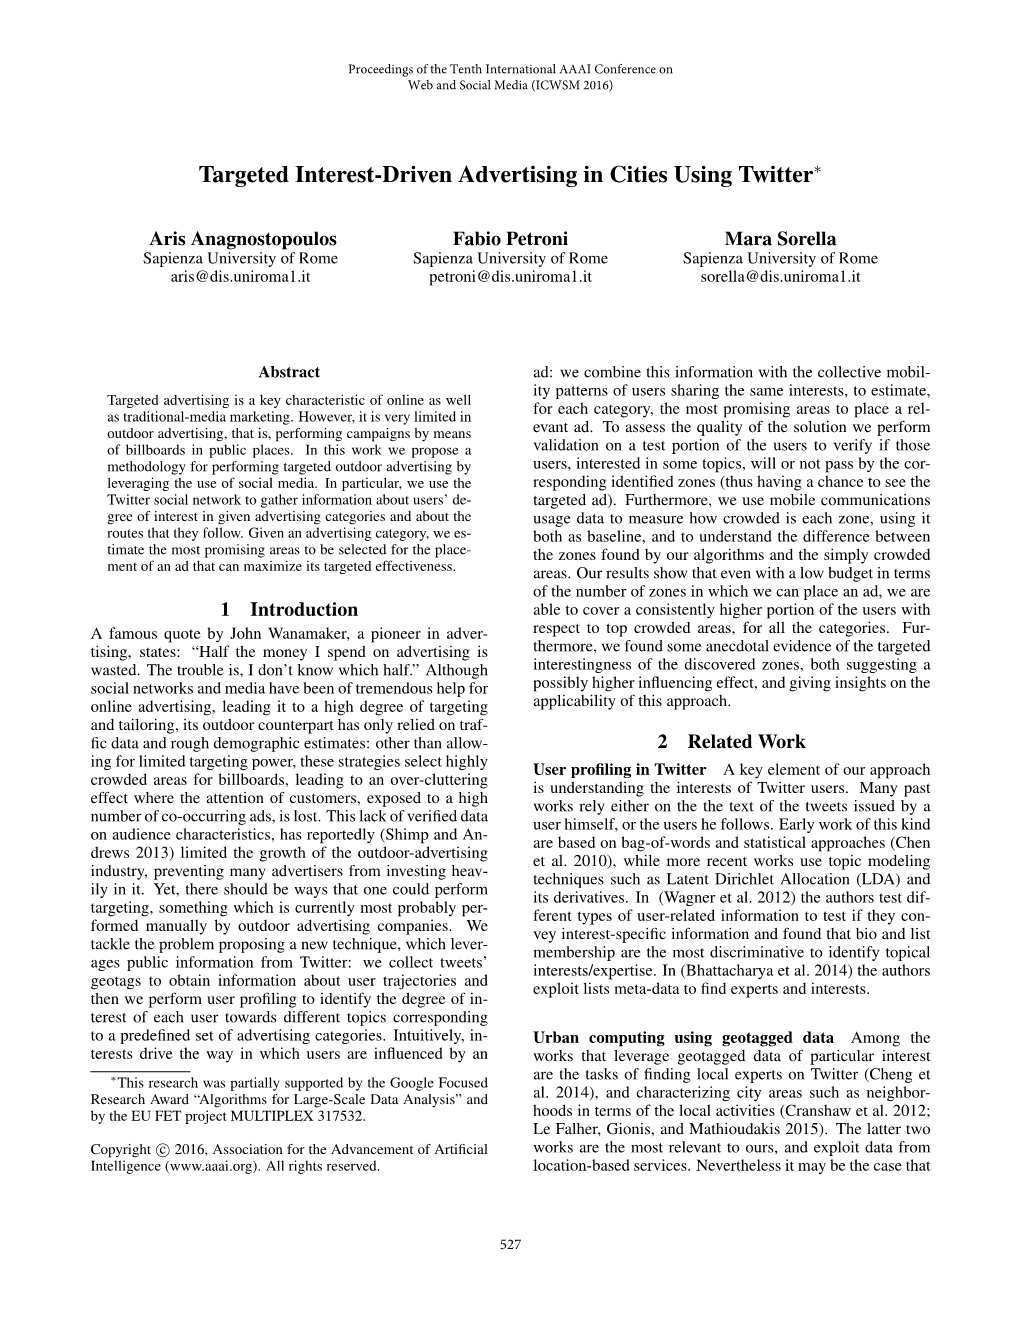 Targeted Interest-Driven Advertising in Cities Using Twitter∗